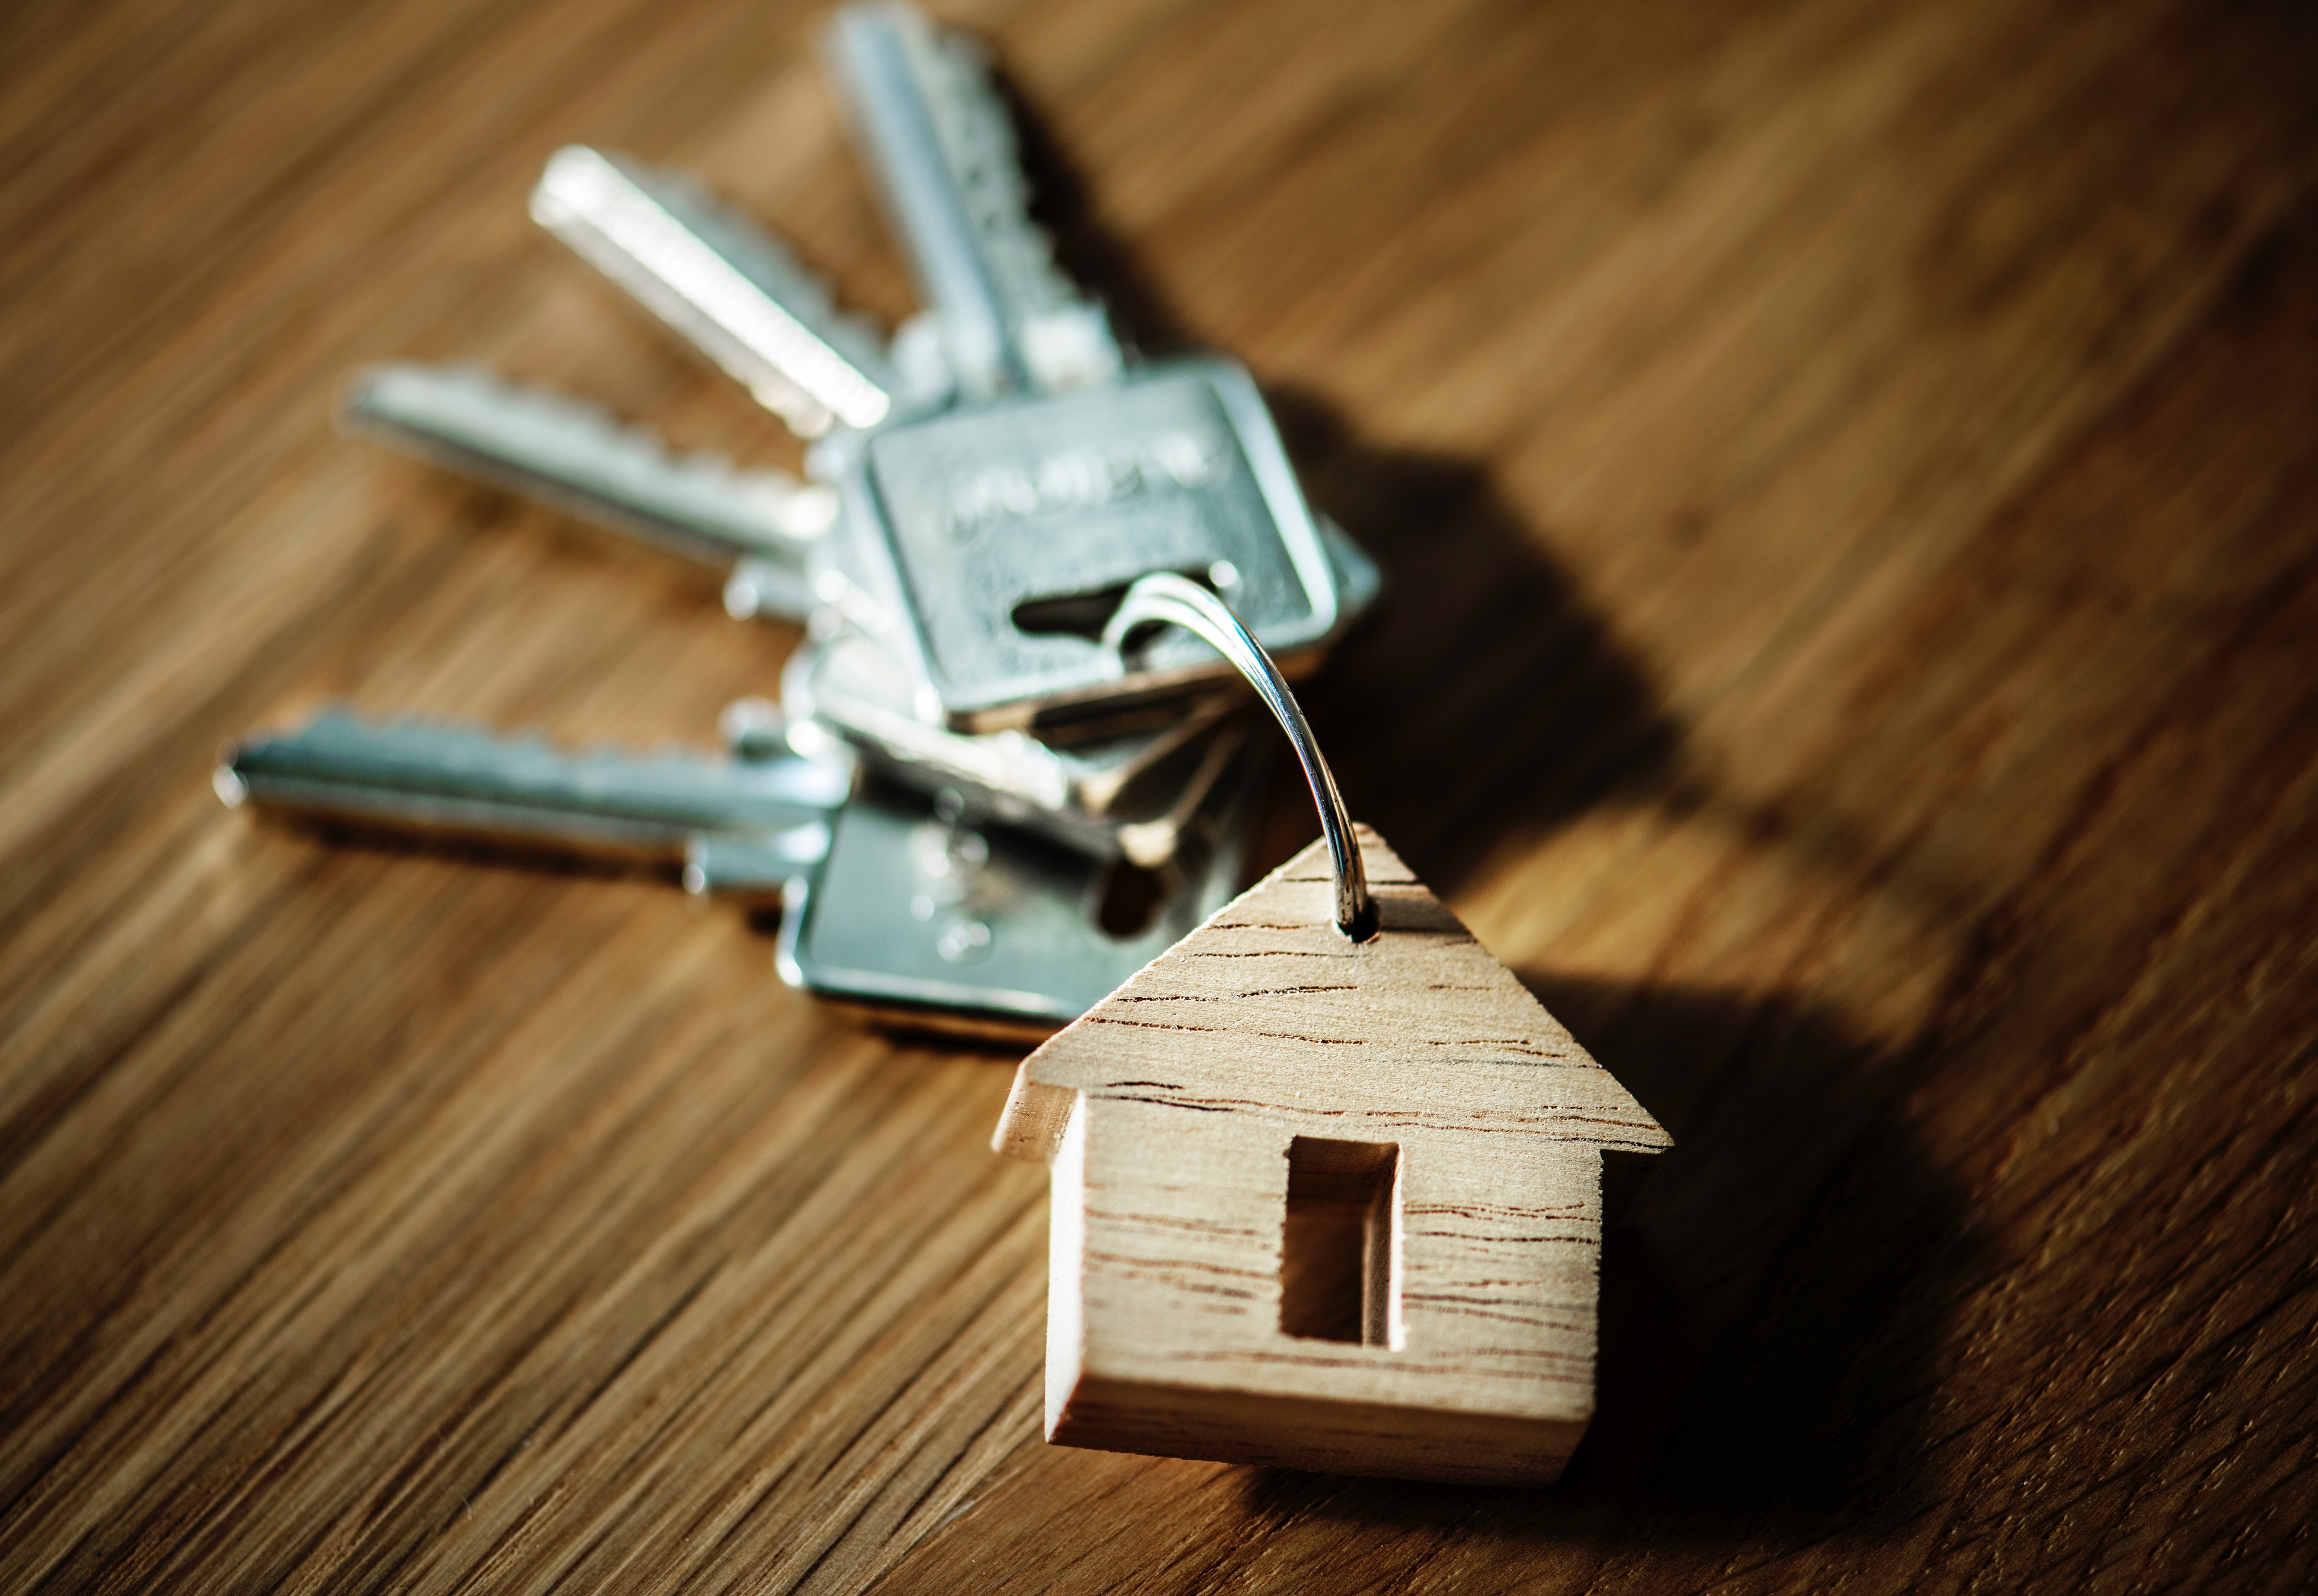 Shared-Ownership for First-Time Buyers